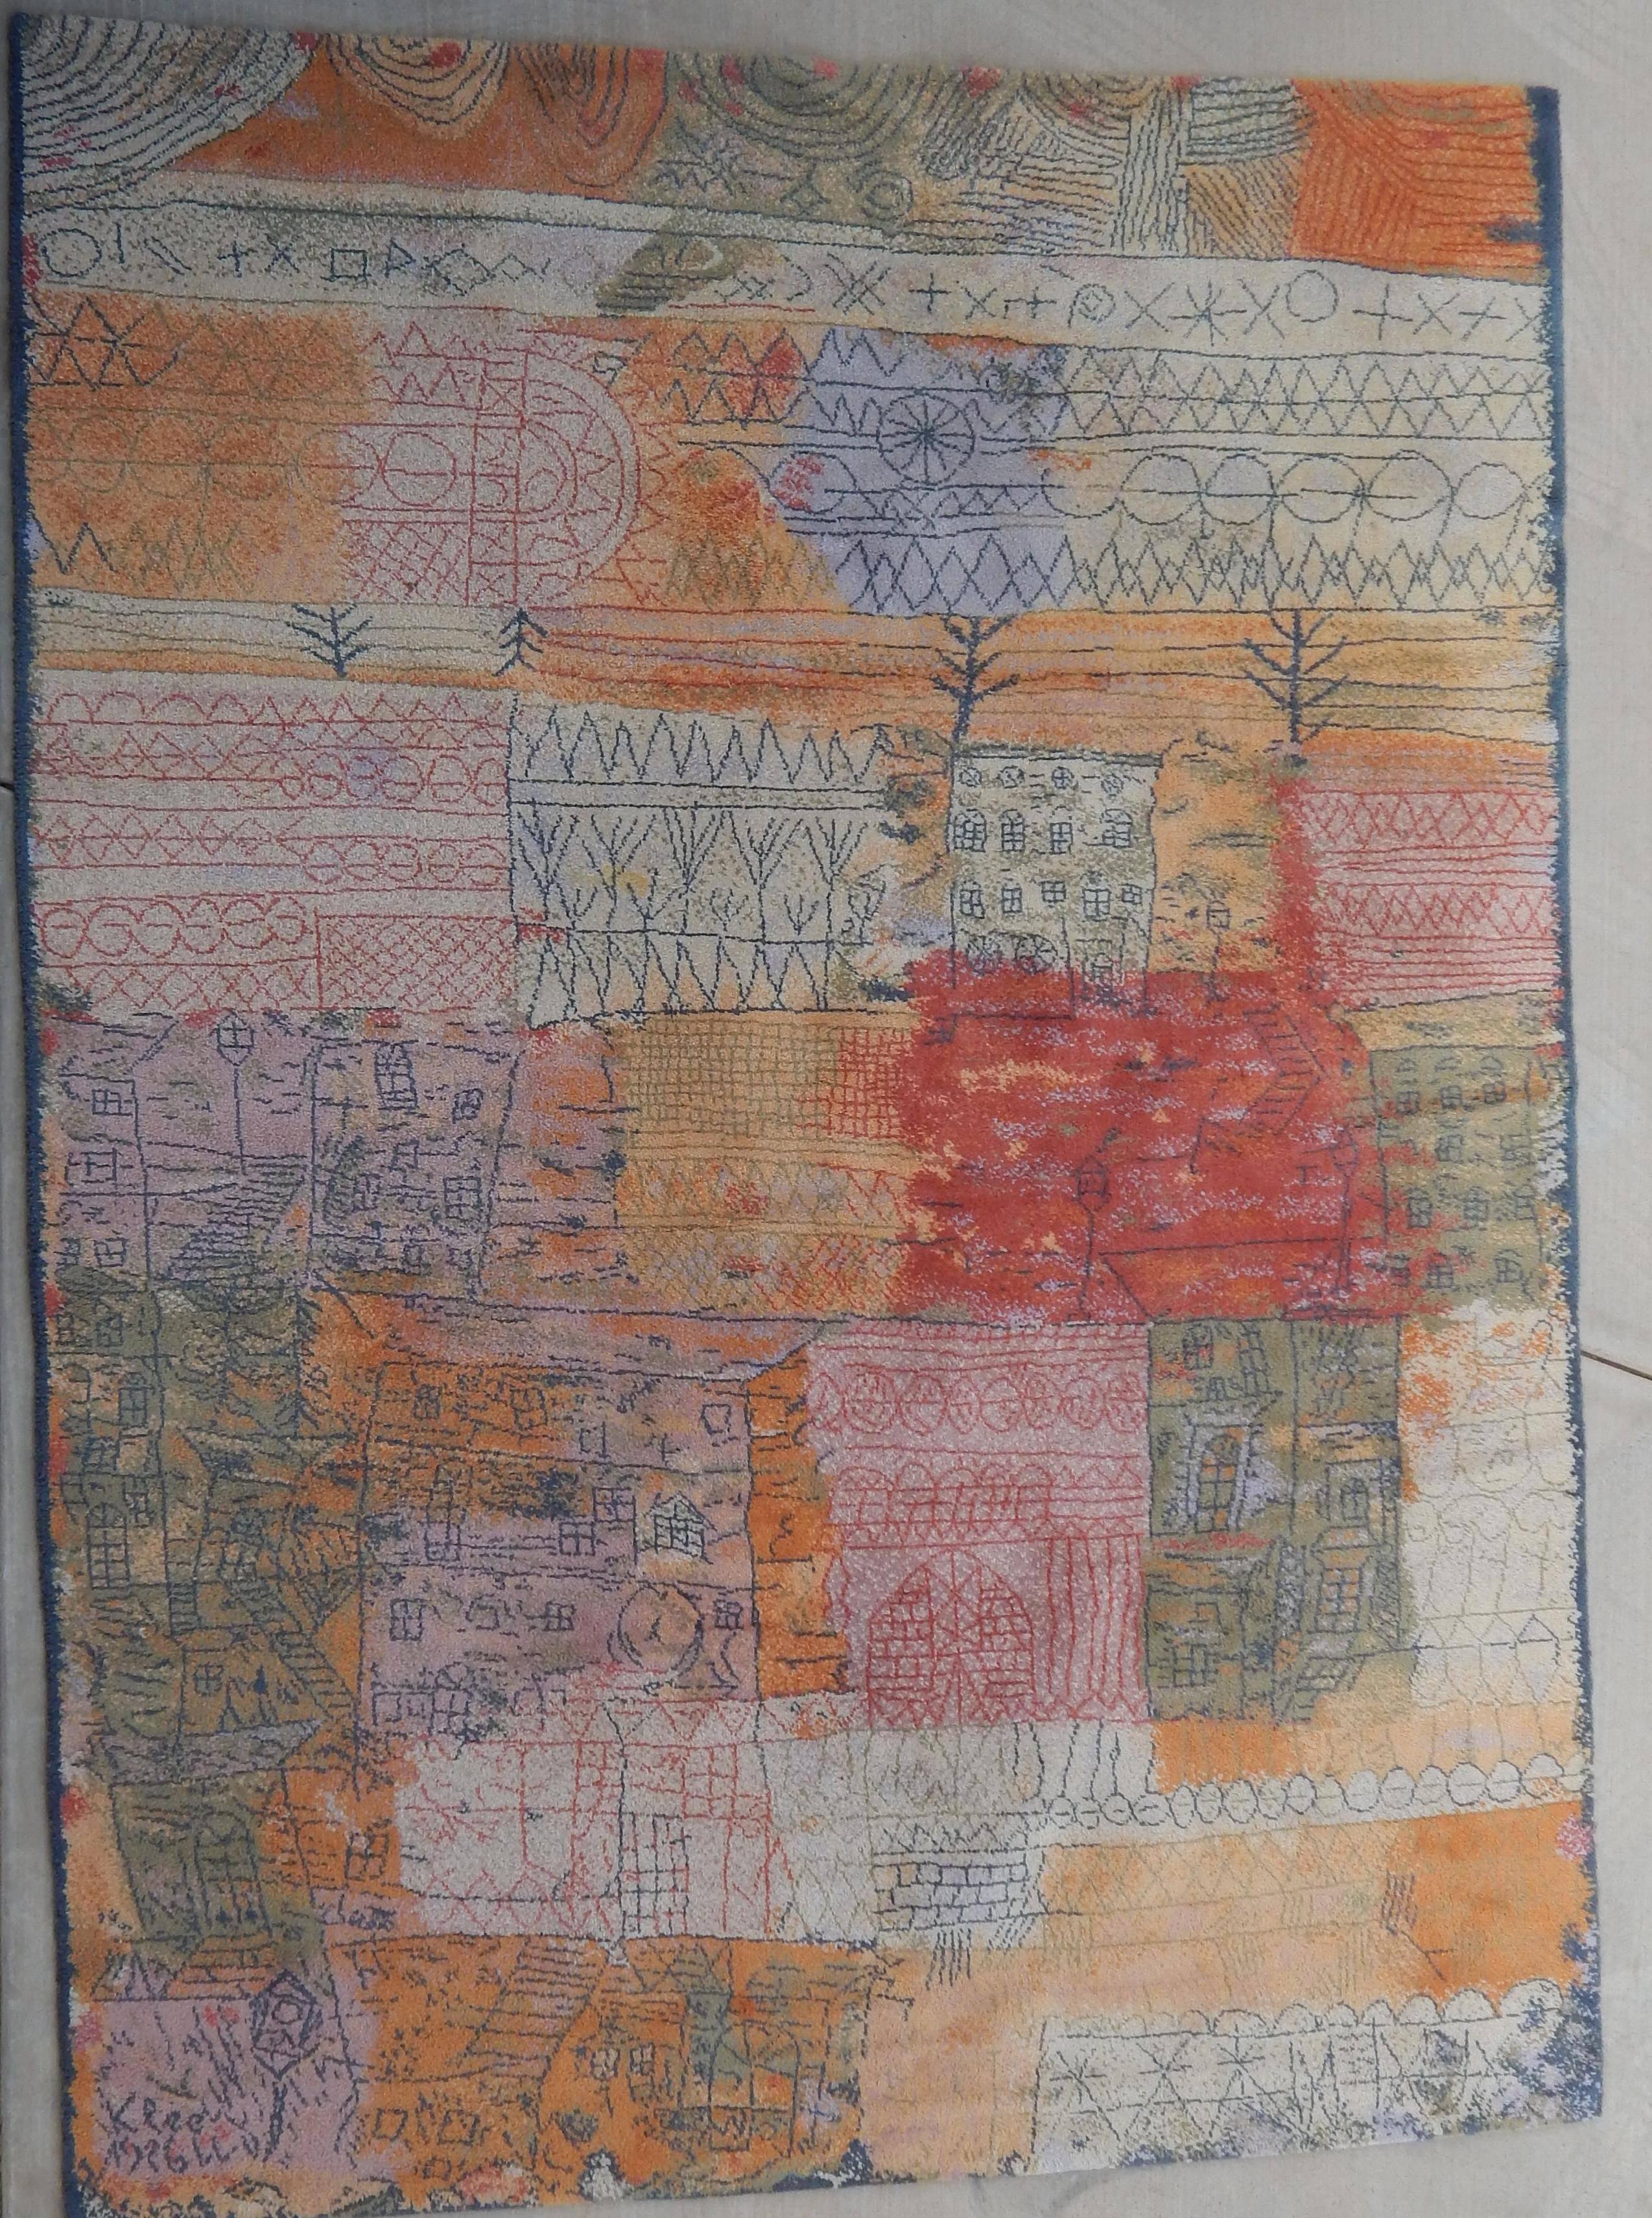 Paul Klee "Florentinisches Villenviertel" Art carpet by Ege Axminster.
133" x 98" - 11 feet x 8 feet approximately.
Paul Klee Design #80535. Made in Denmark.
In excellent condition. Label on the reverse side.

Woolen rug